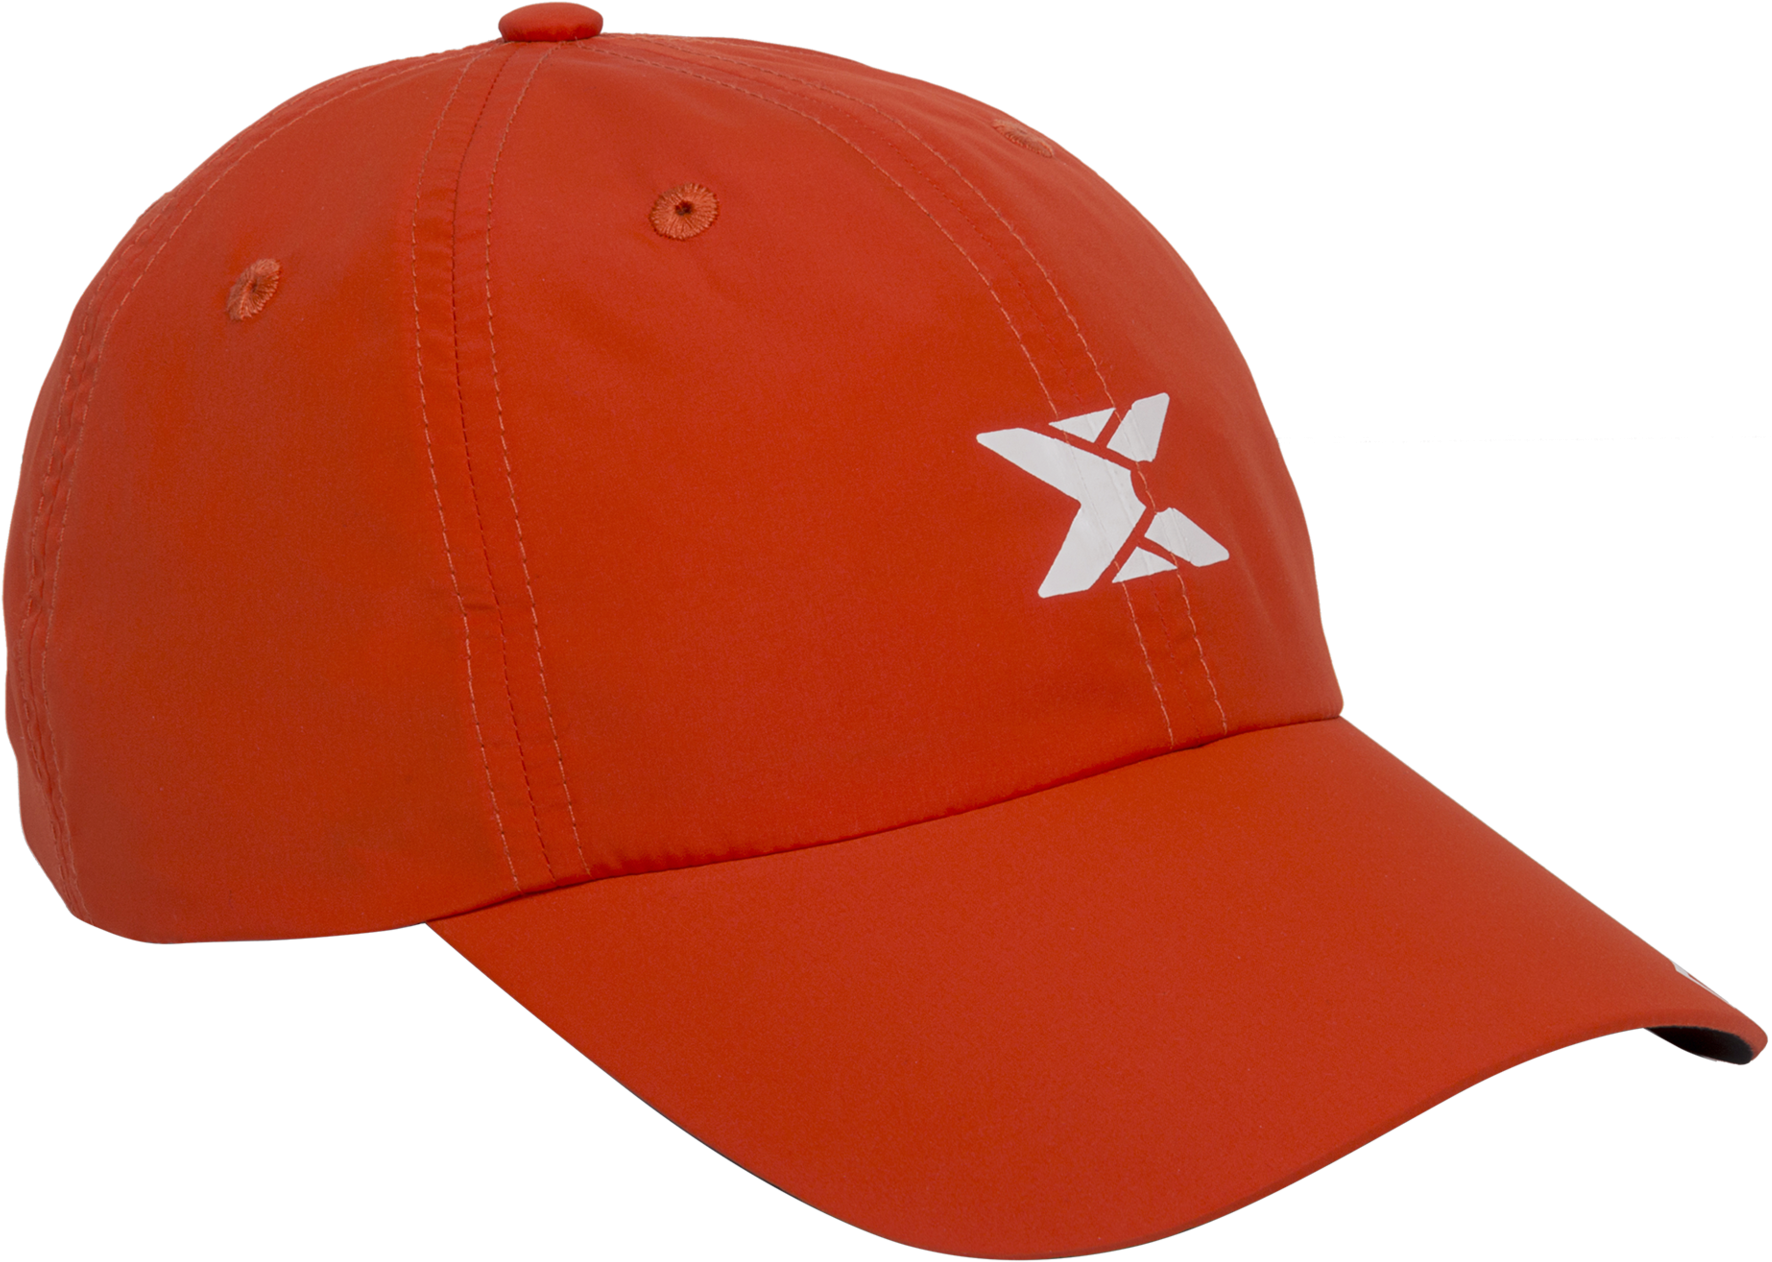 A Red Hat With A White X On It